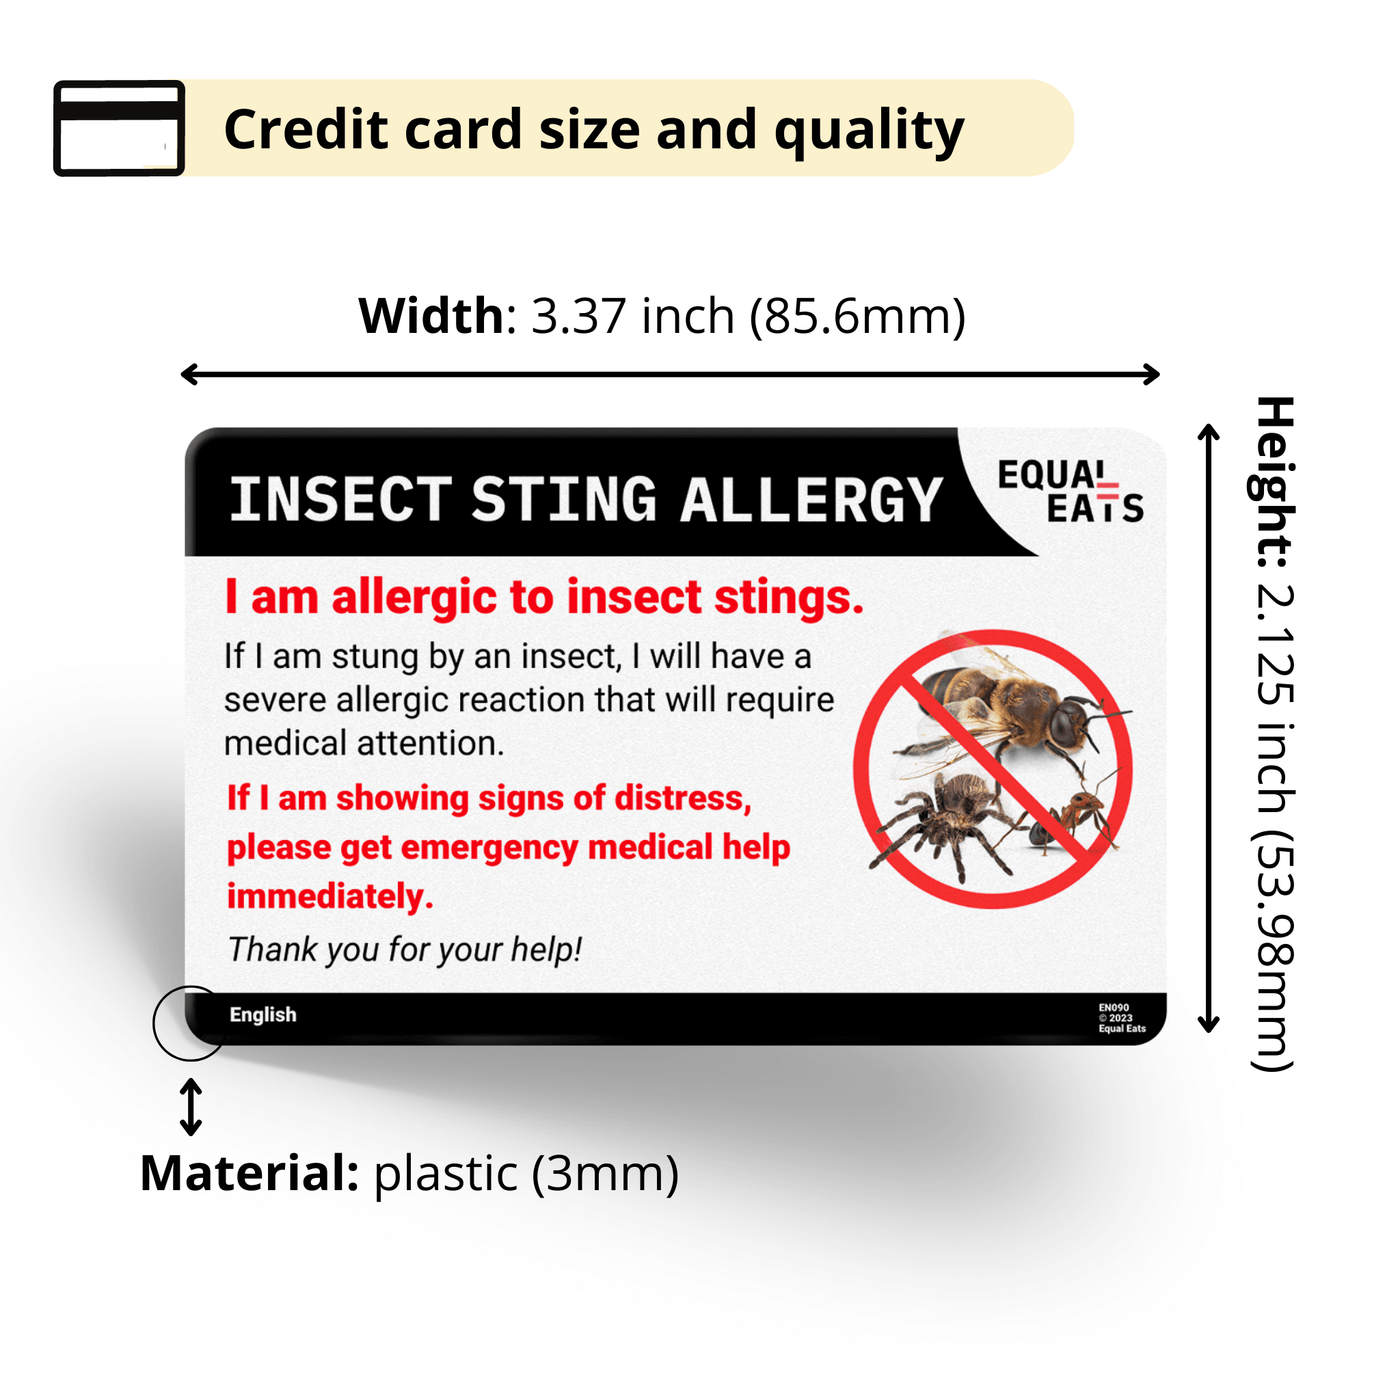 Japanese Insect Sting Allergy Card